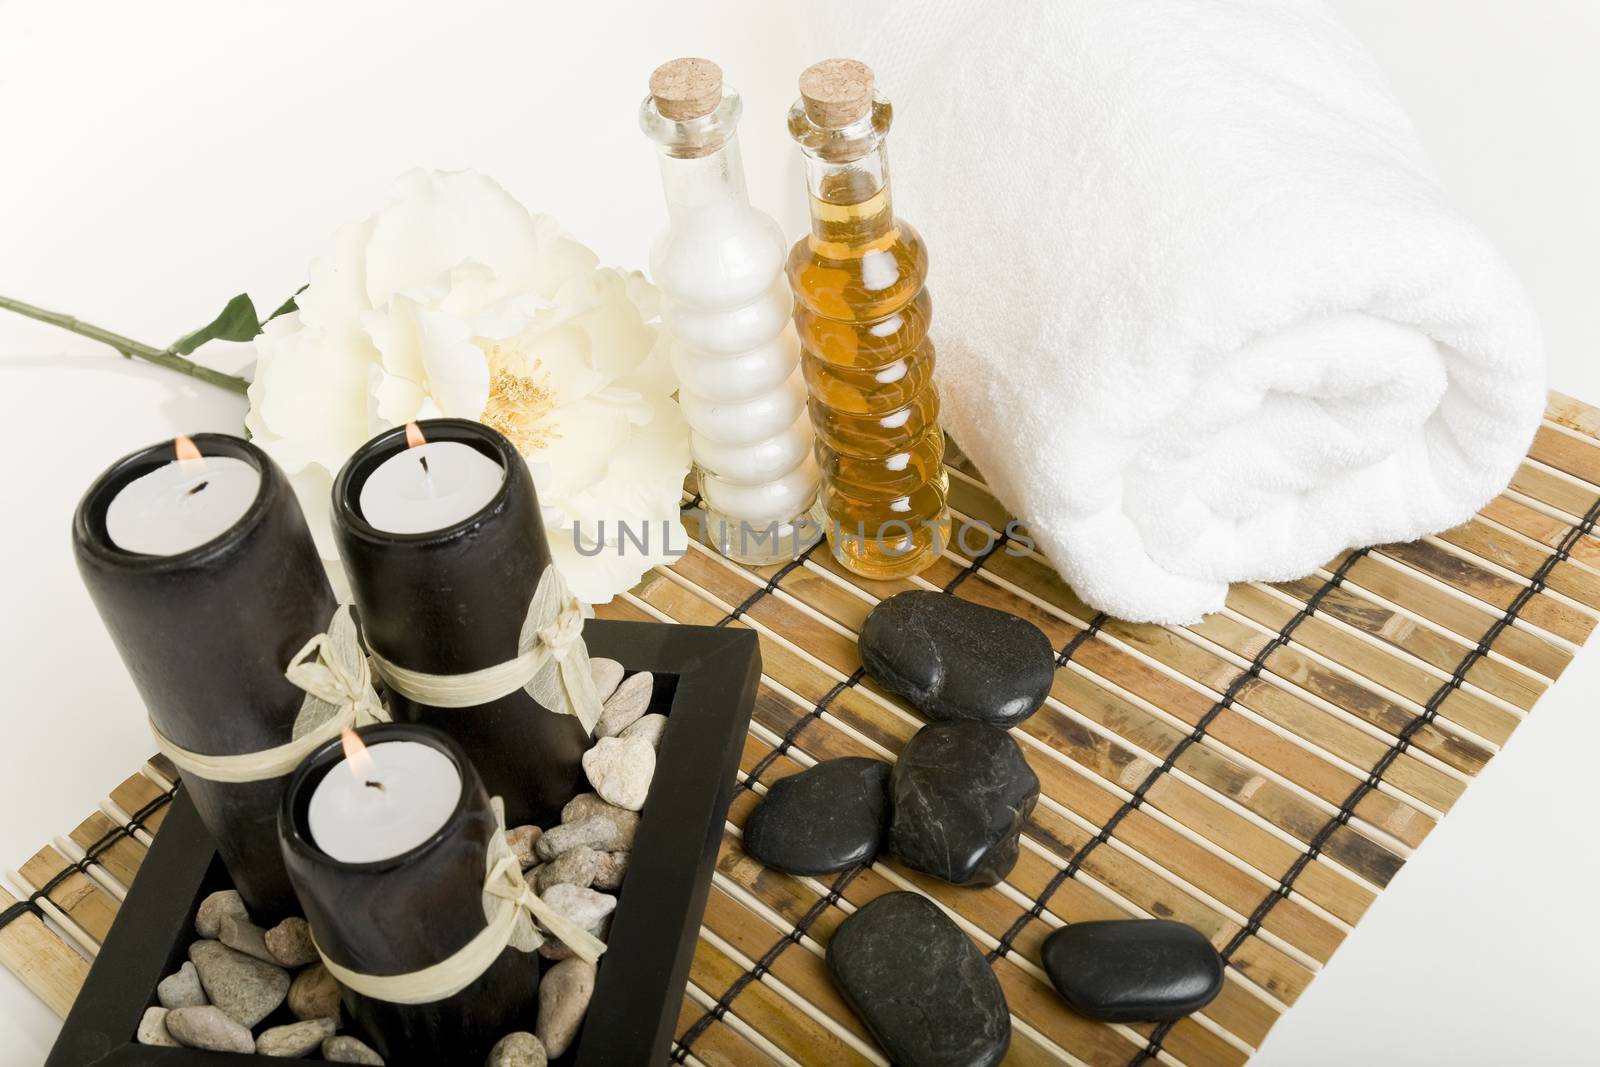 The candles are lit & massage stones, oils, & a towel are all laid out in preparation for a spa treatment.